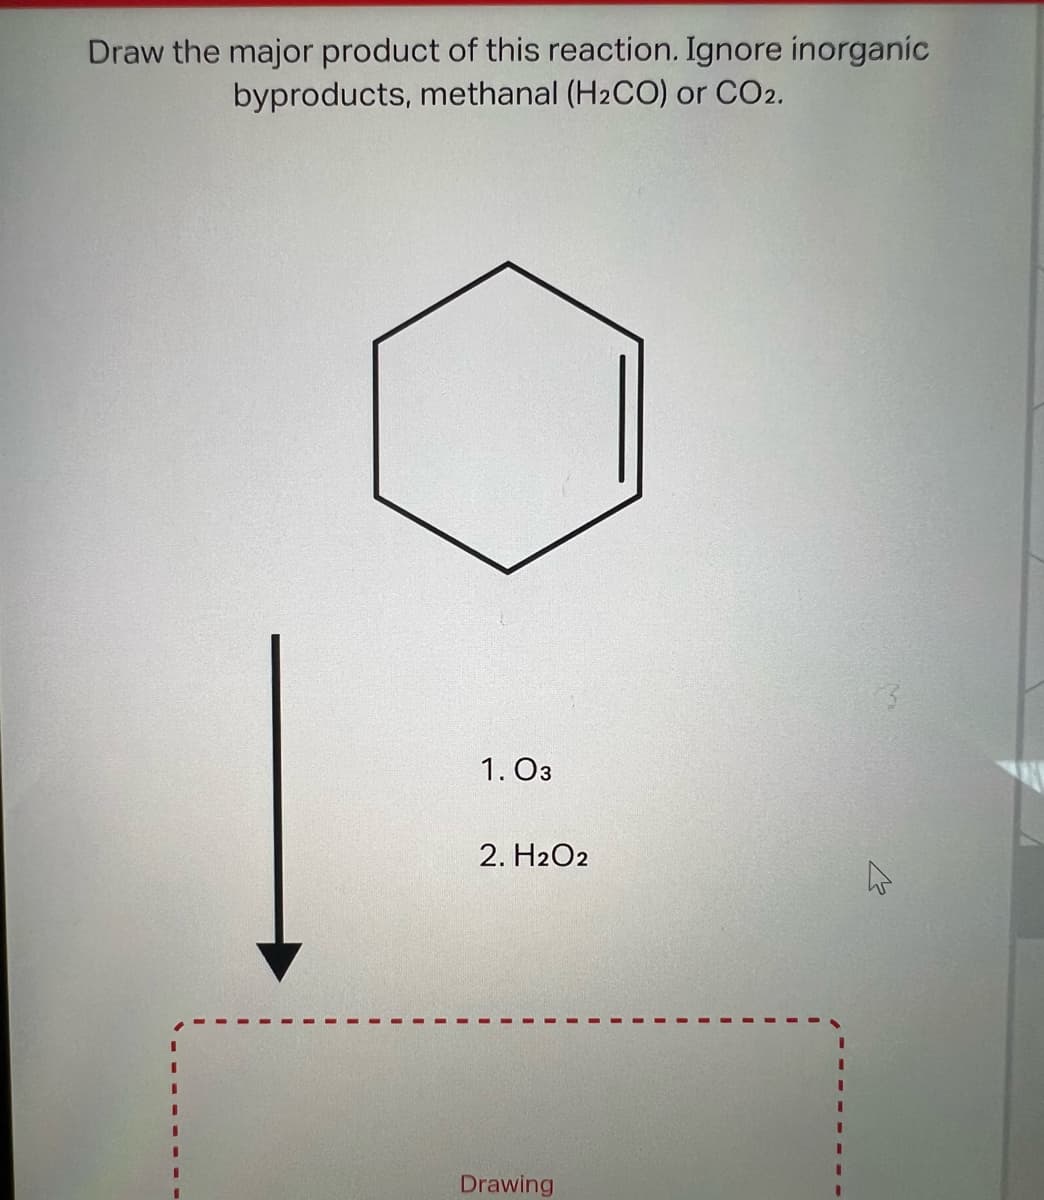 Draw the major product of this reaction. Ignore inorganic
byproducts, methanal (H₂CO) or CO2.
1.03
2. H2O2
Drawing
A